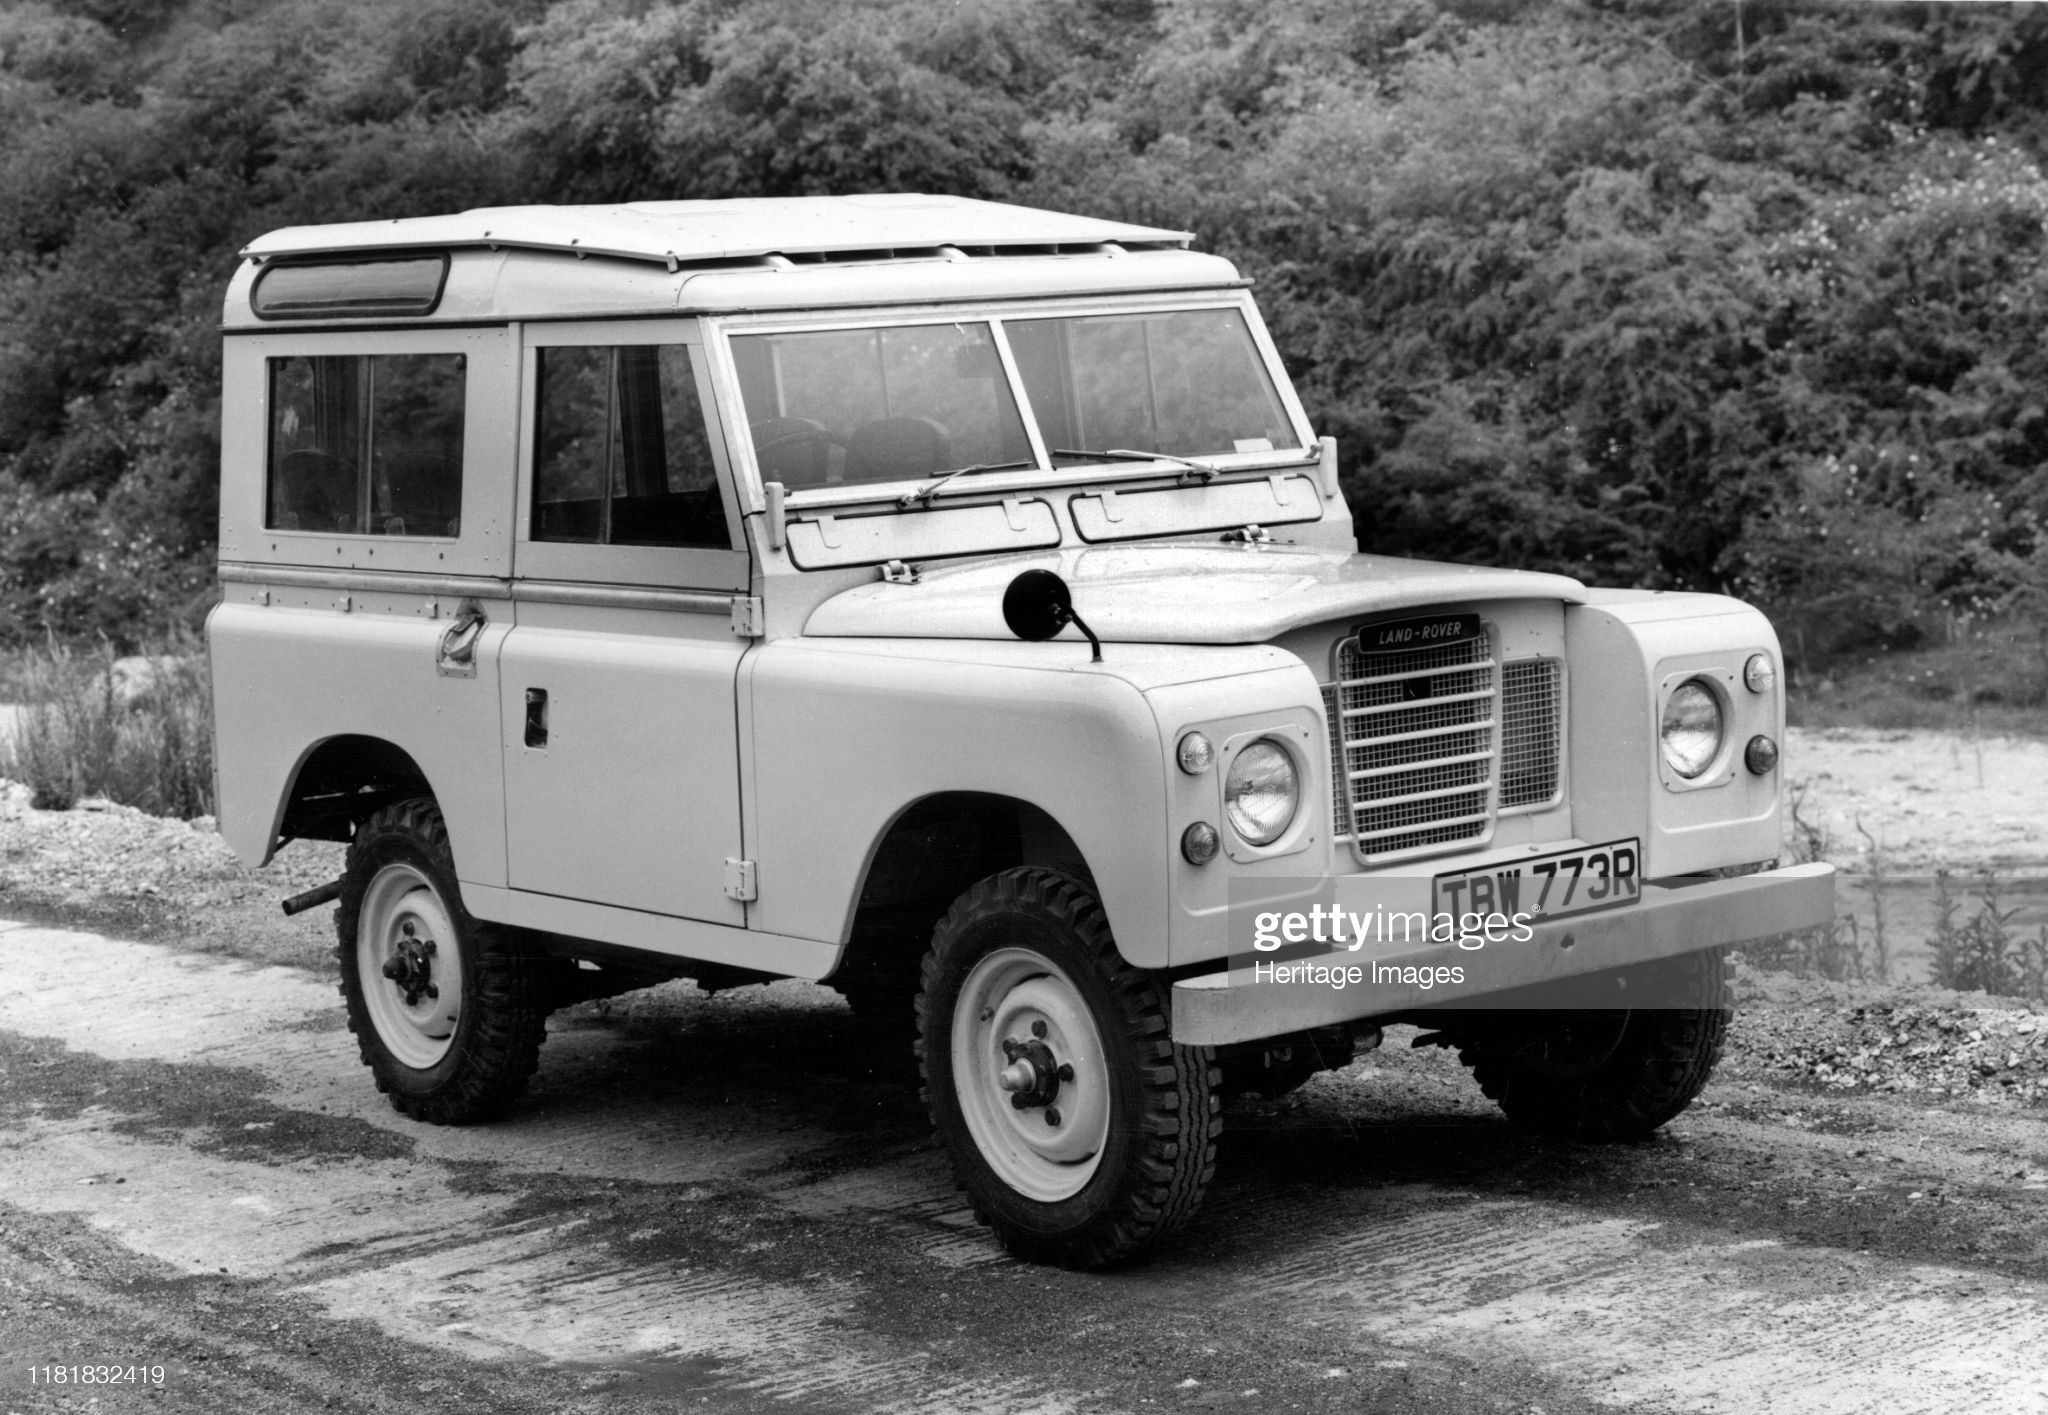 Land Rover 88 series 3. 